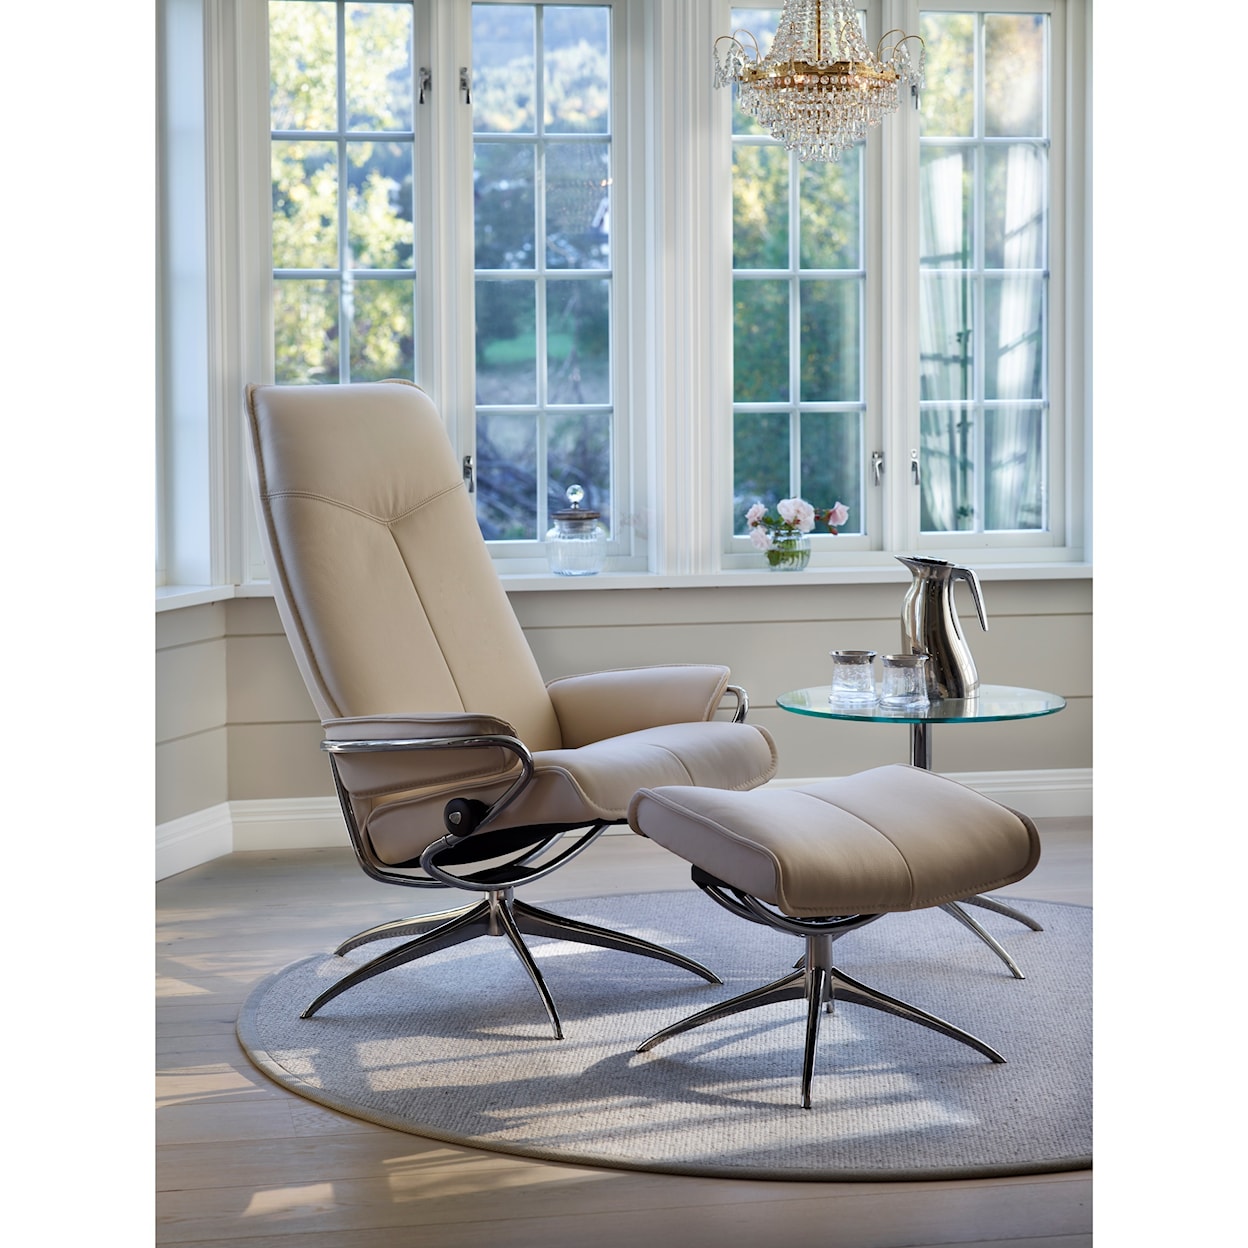 Stressless by Ekornes Tables Small Urban Table